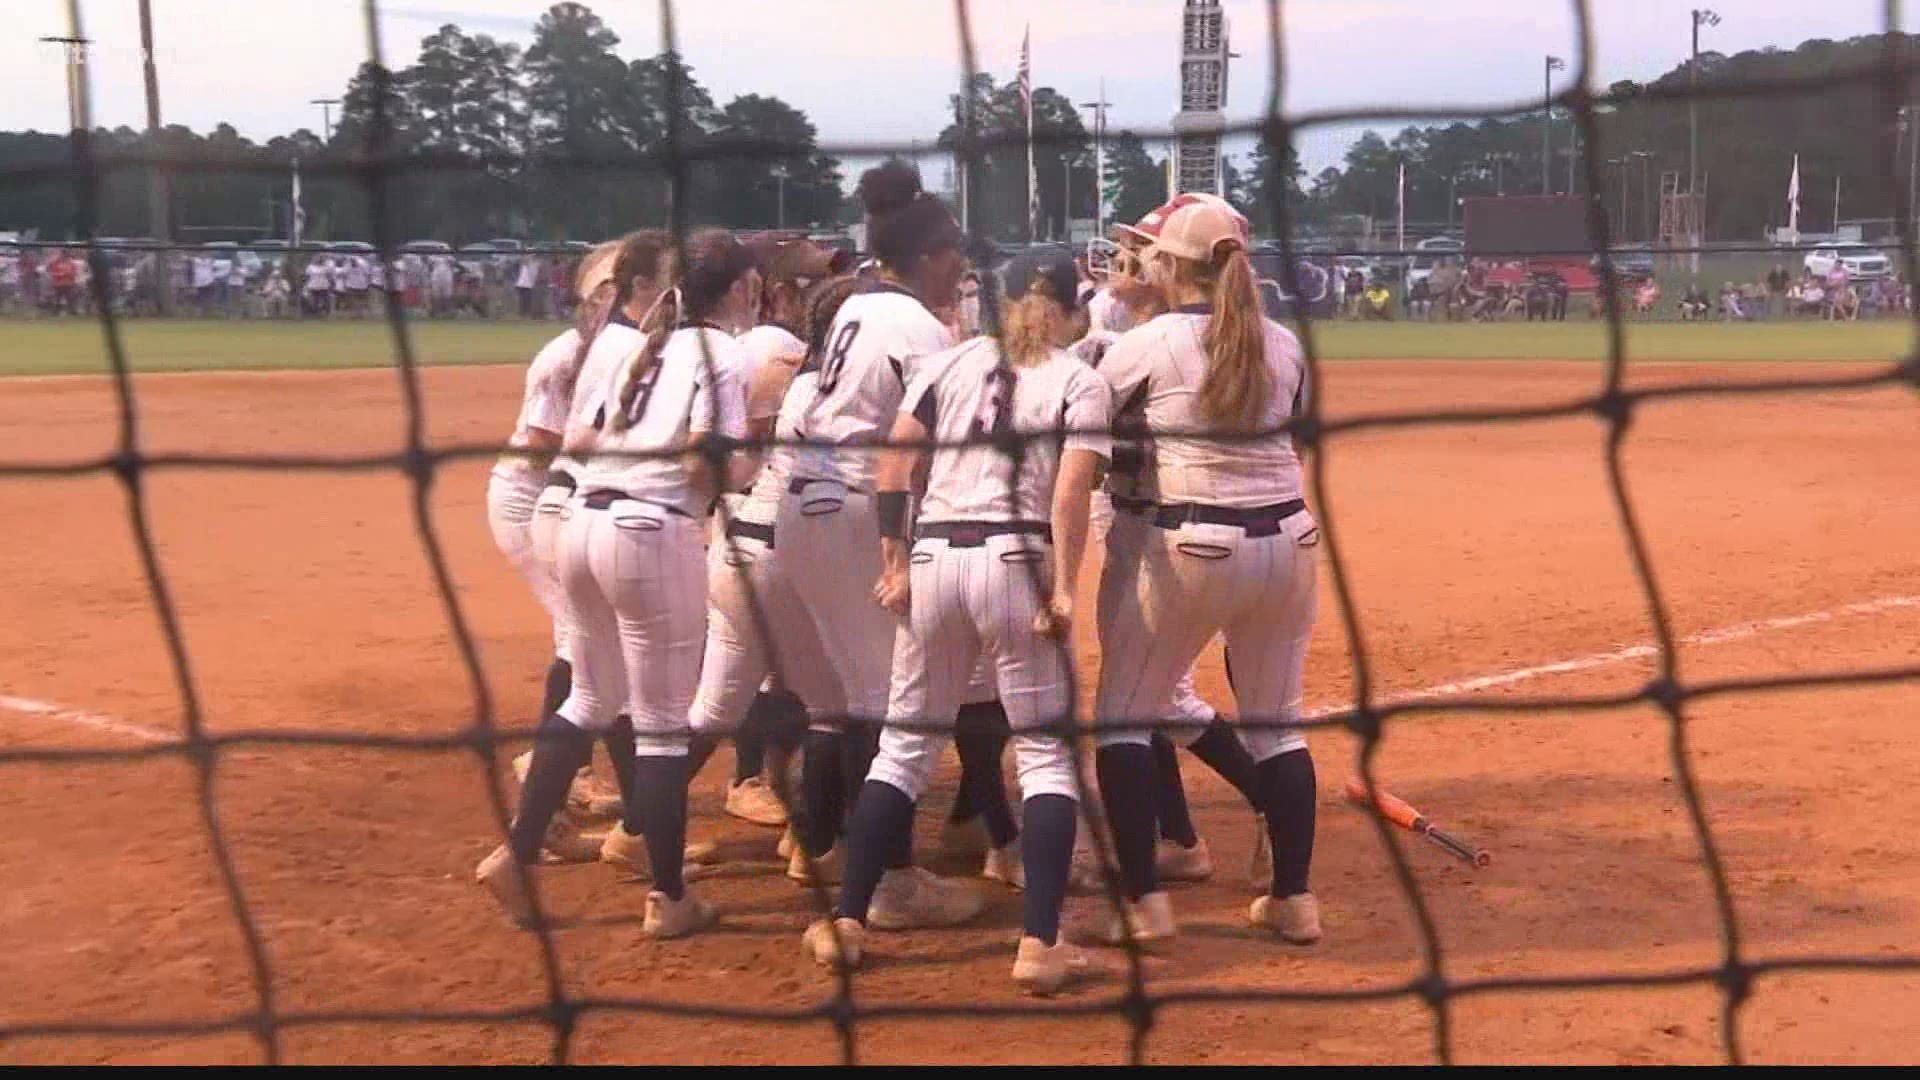 Lugoff-Elgin captures its first state championship in softball with a come-from-behind 5-4 victory over Darlington.